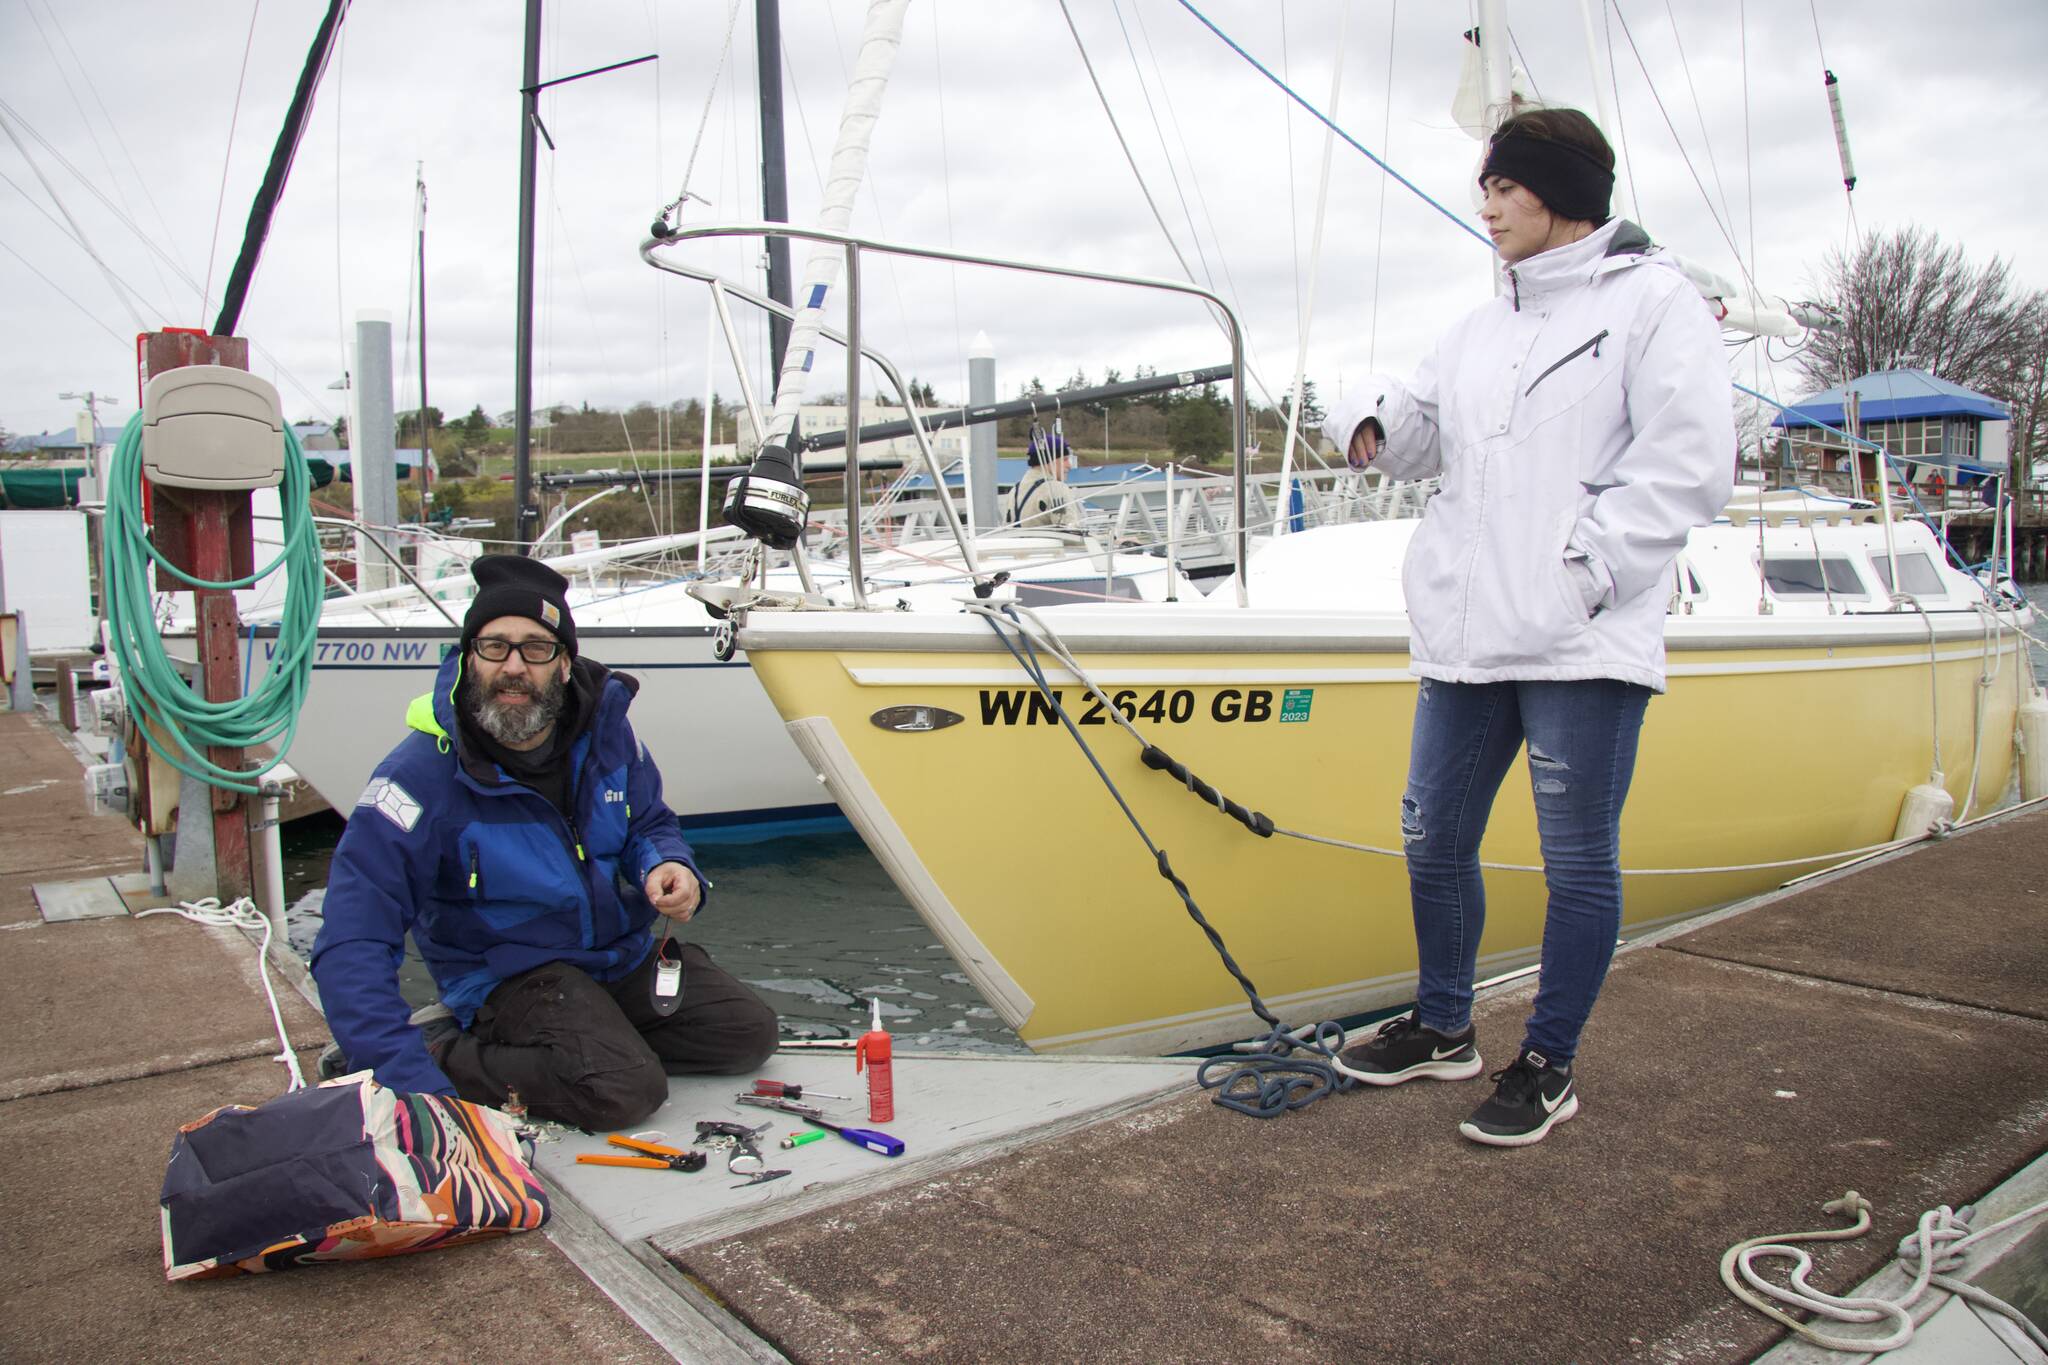 Brian Vick (left) and his daughter Raven sail their boat “Lemonade” in the Oak Harbor Yacht Club’s Frostbite Series. (Photo by Rachel Rosen/Whidbey News-Times)